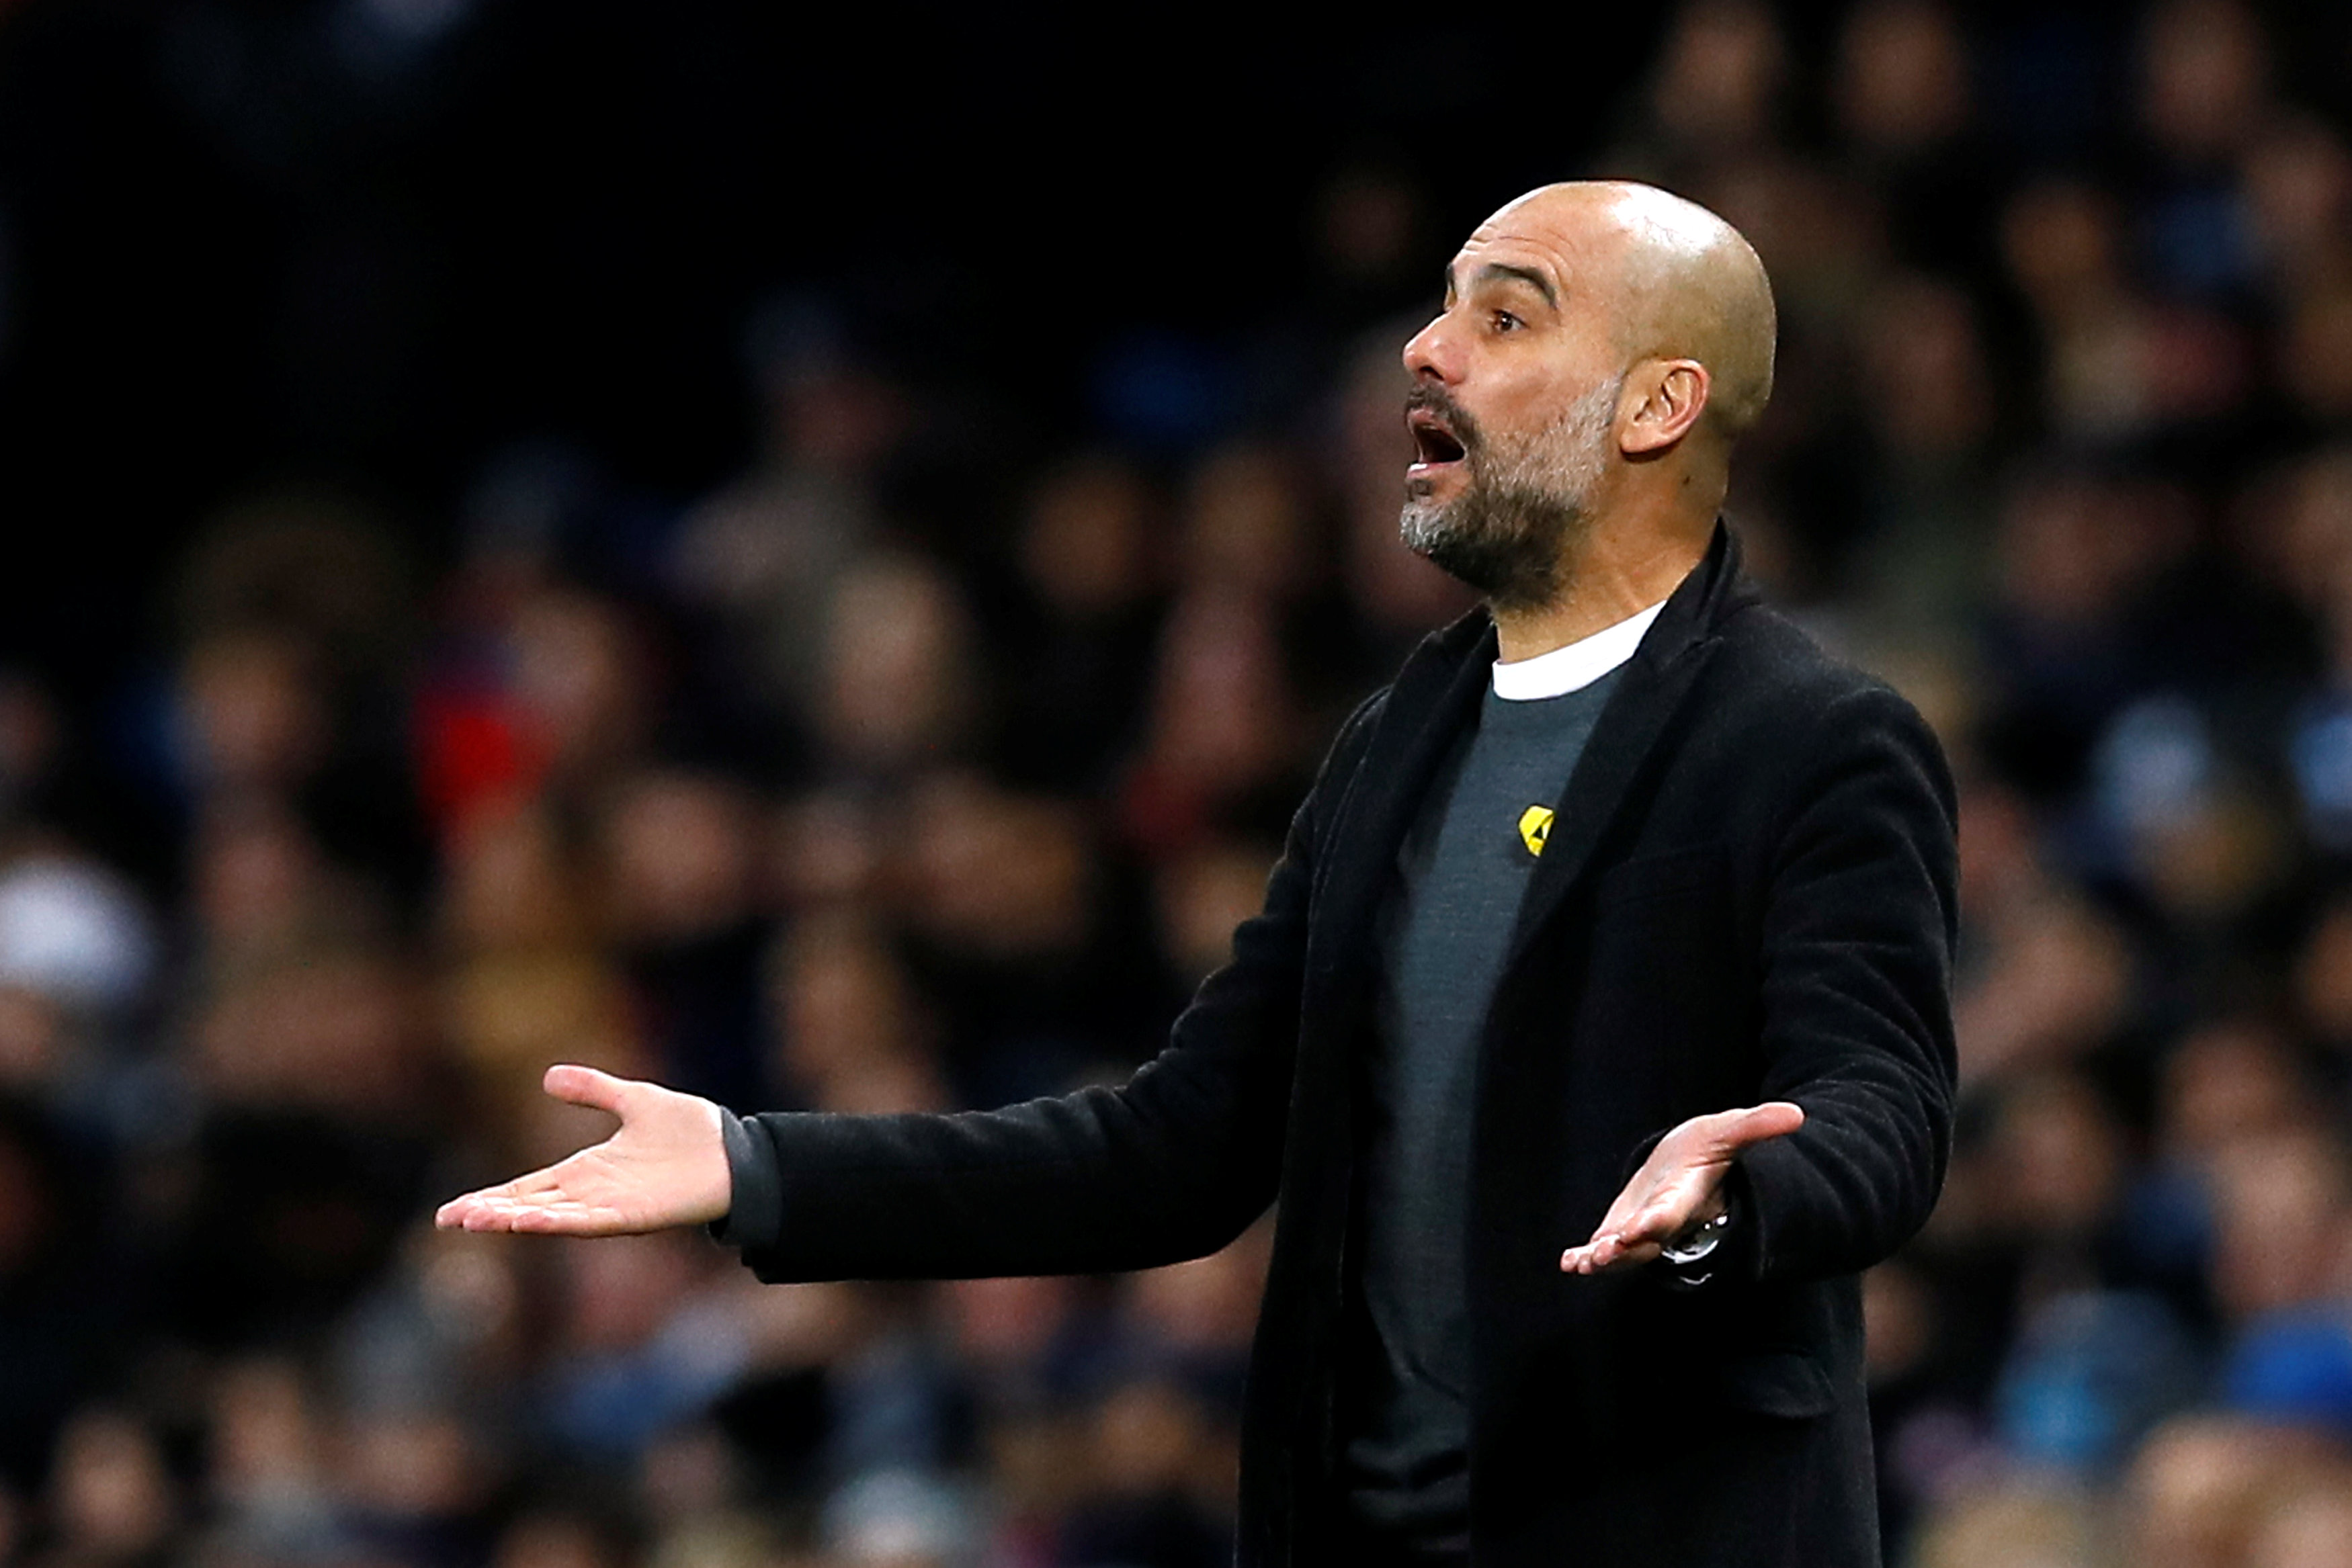 Manchester City manager Pep Guardiola during Champion's League game vs FC Basel in March (by Reuters)